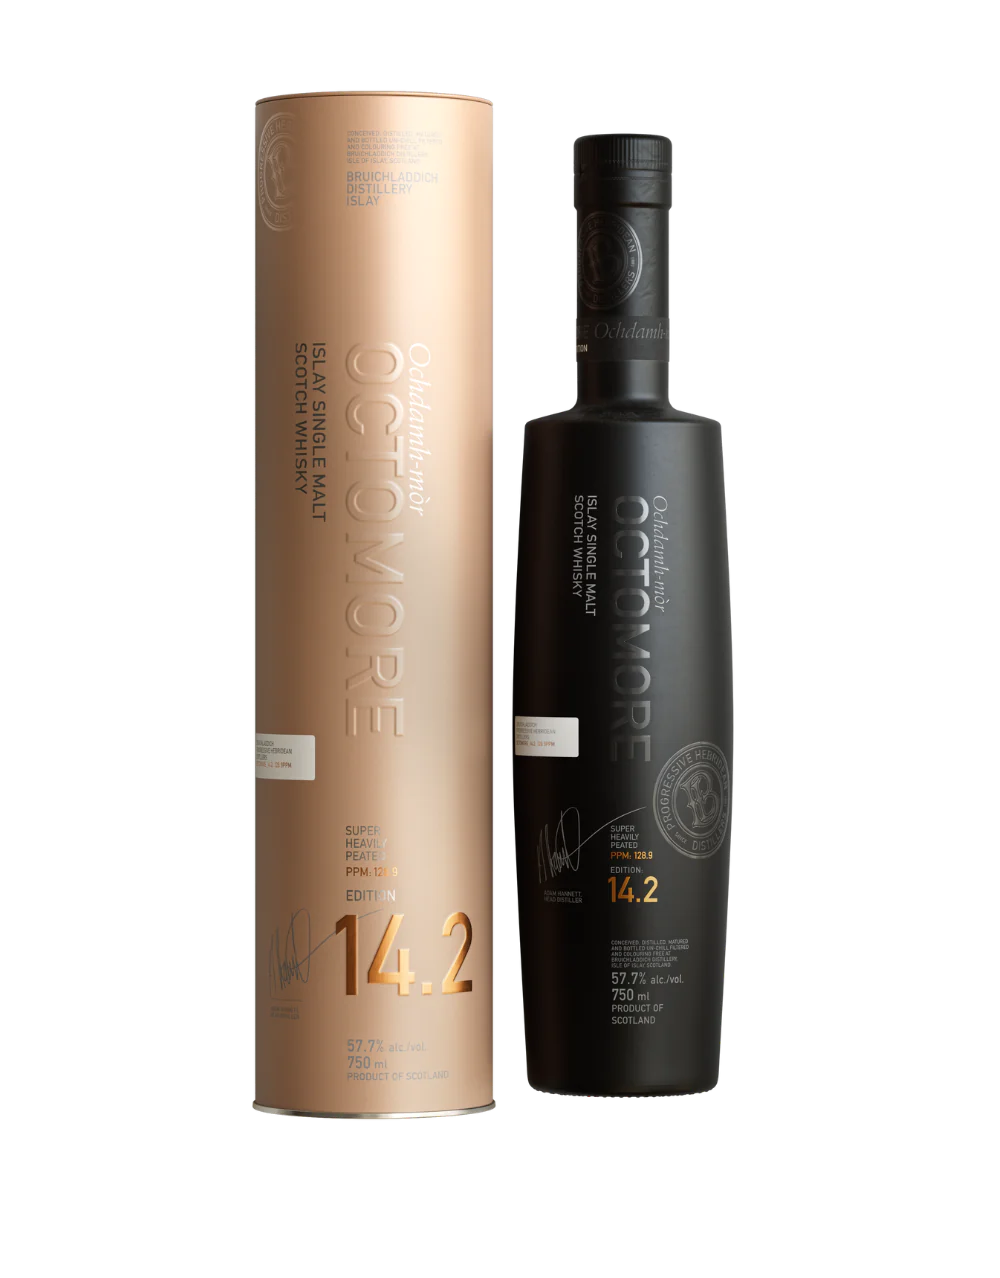 Octomore 14.2 750mL a tall rose gold color tin cylinder next to a tall slender round shouldered black glass bottle